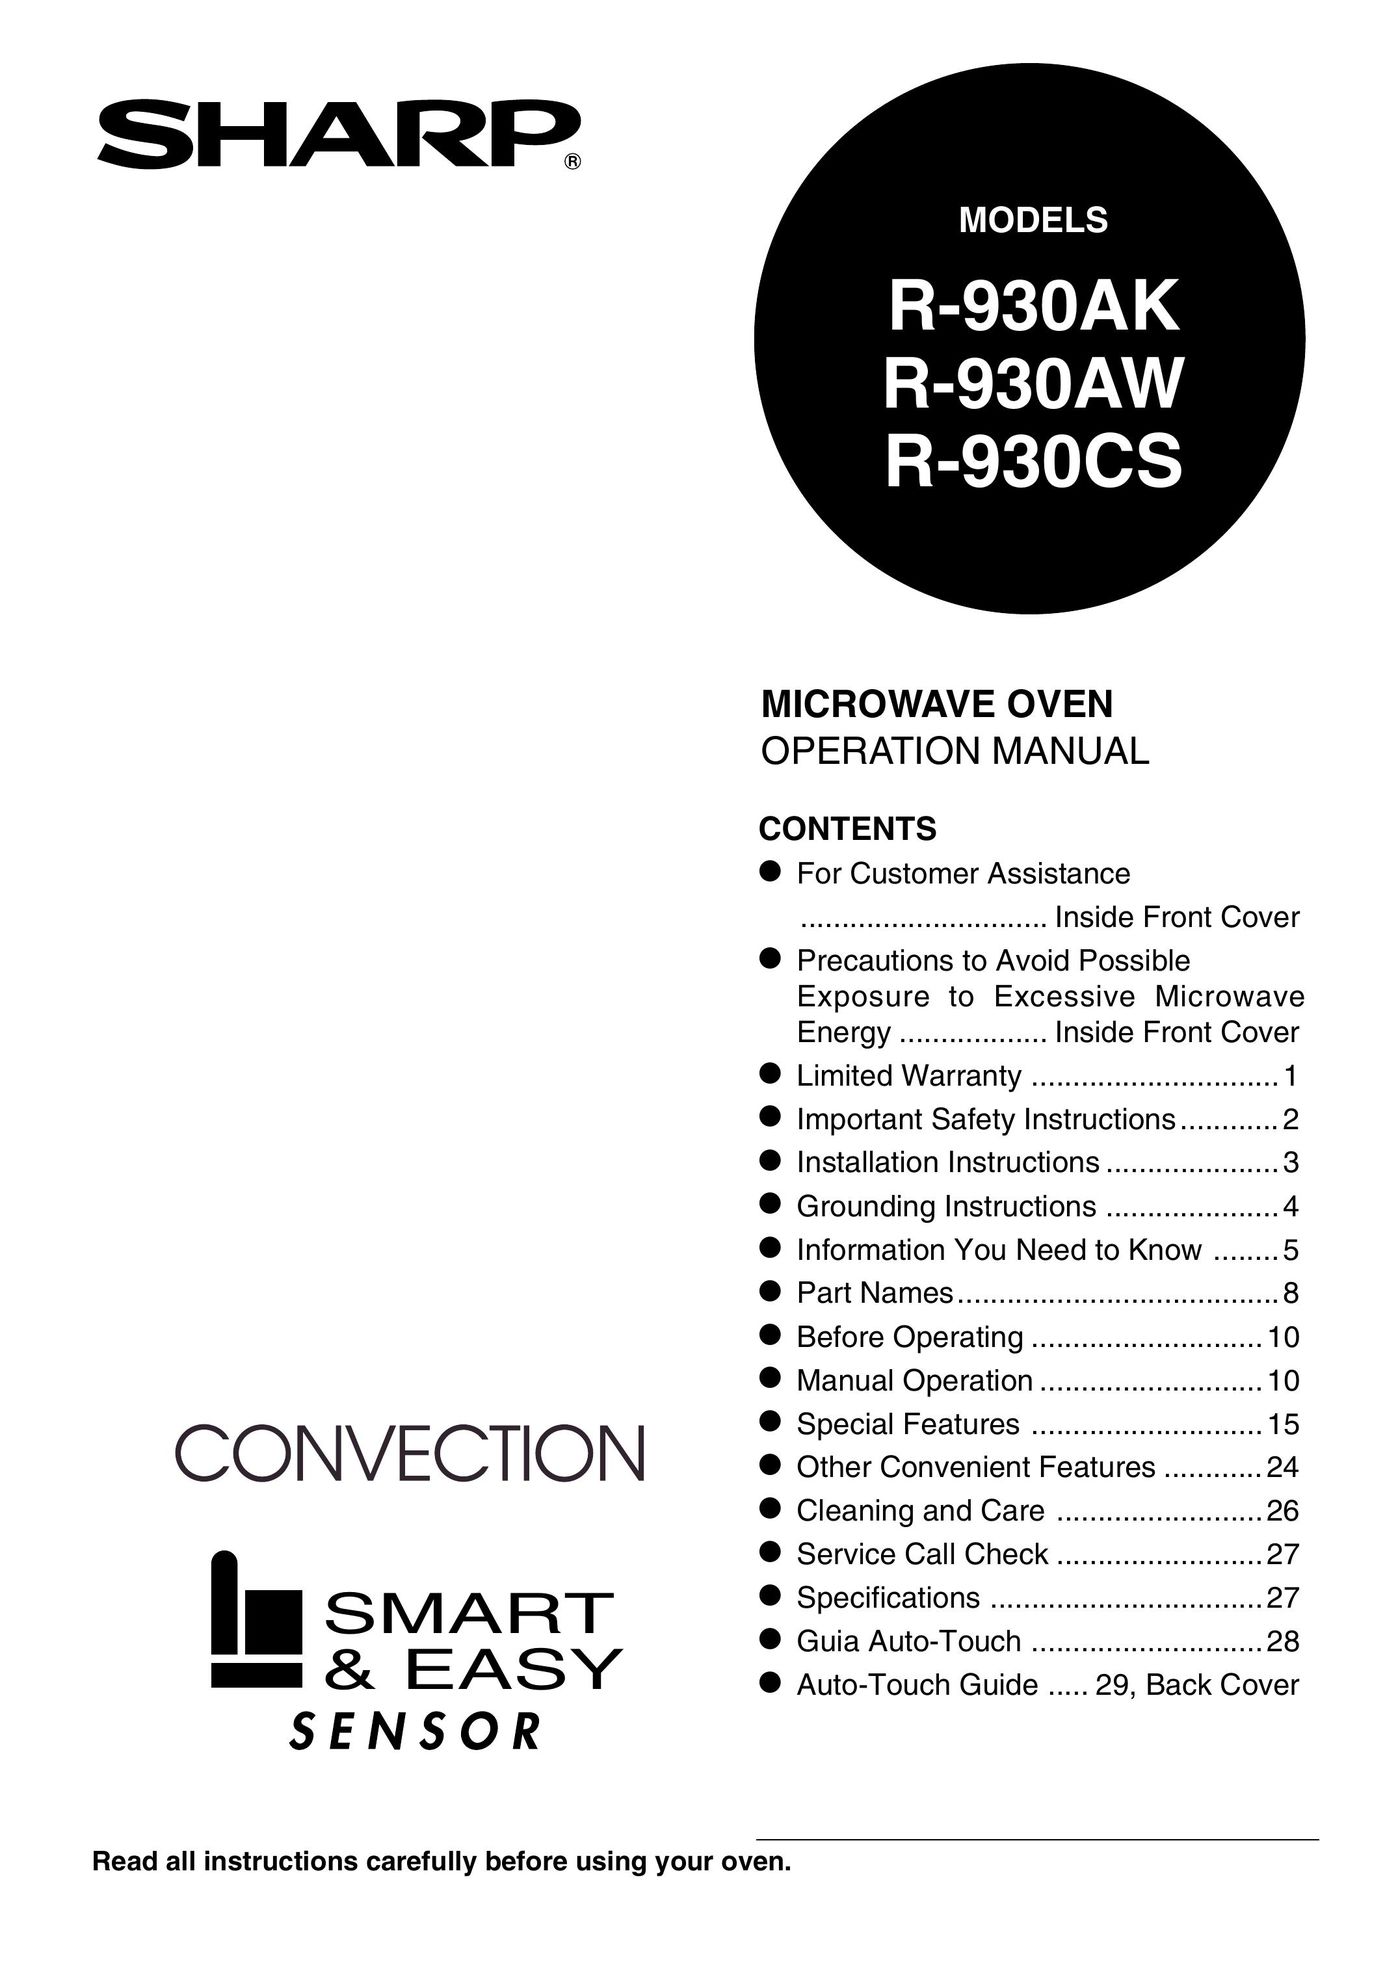 Sharp R-930AK Convection Oven User Manual